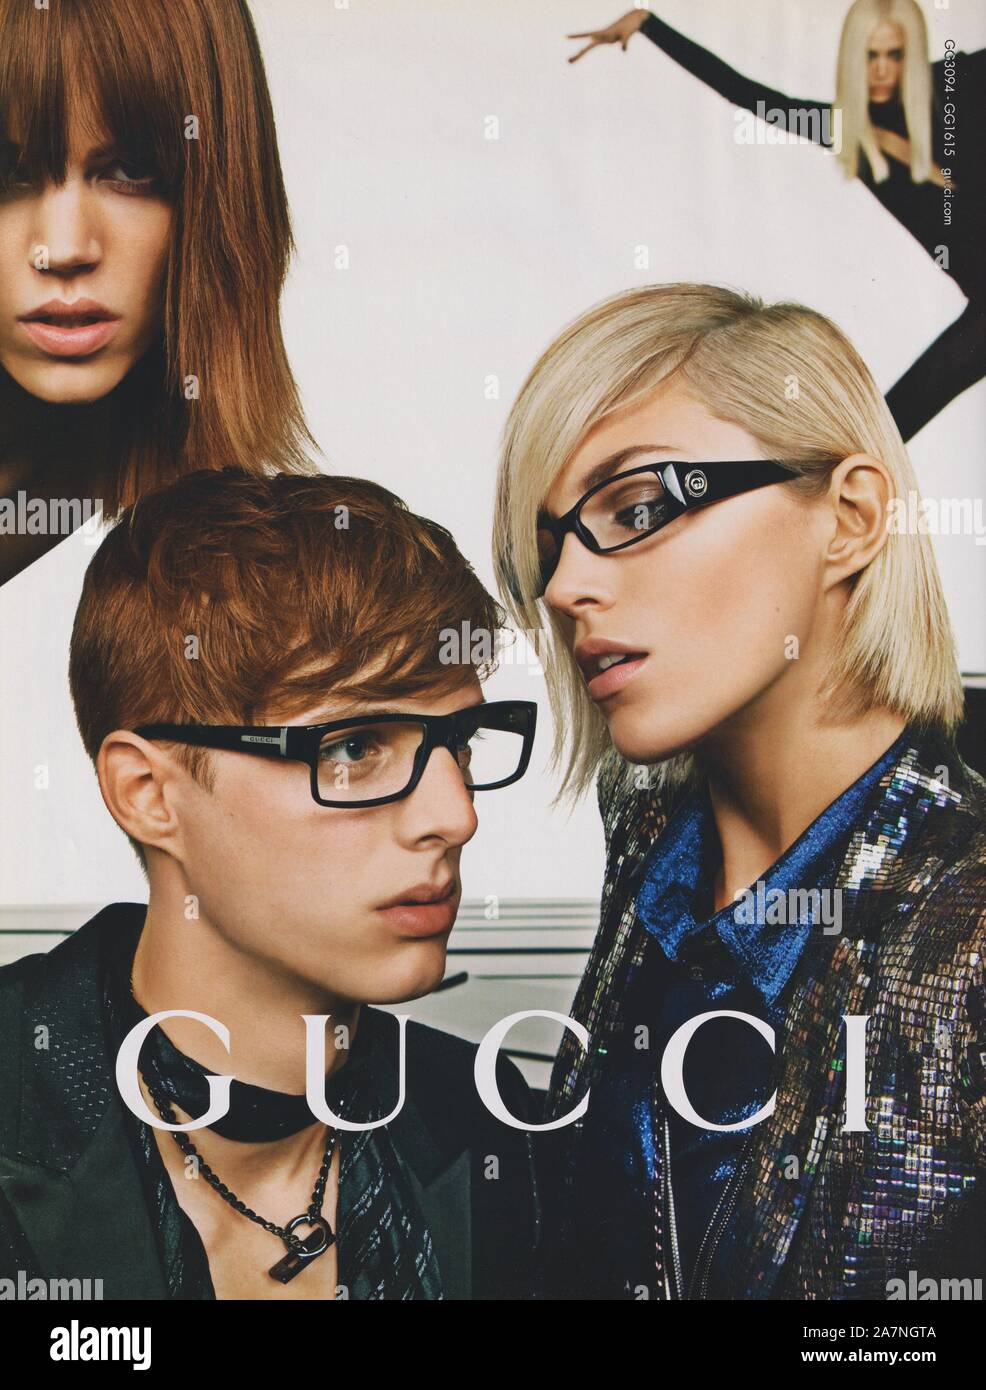 Gucci Advertisement Hi-res Stock Photography And Images, 59% OFF